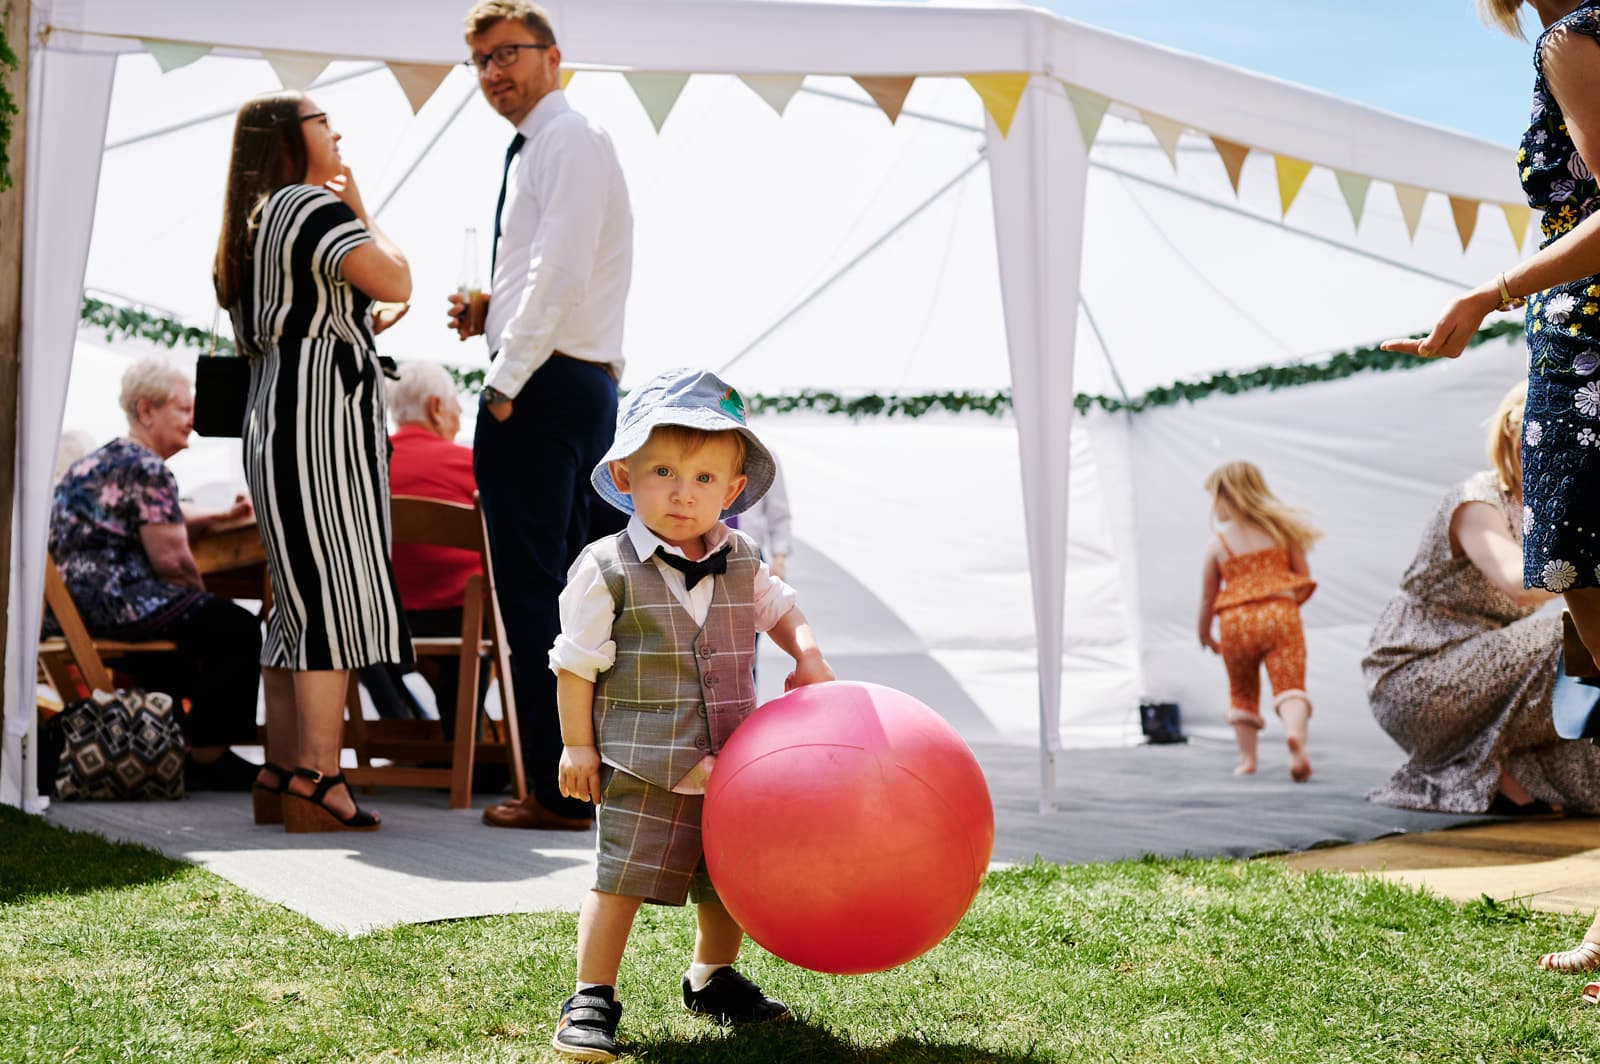 Young boy plays with red ball at DIY wedding party in garden